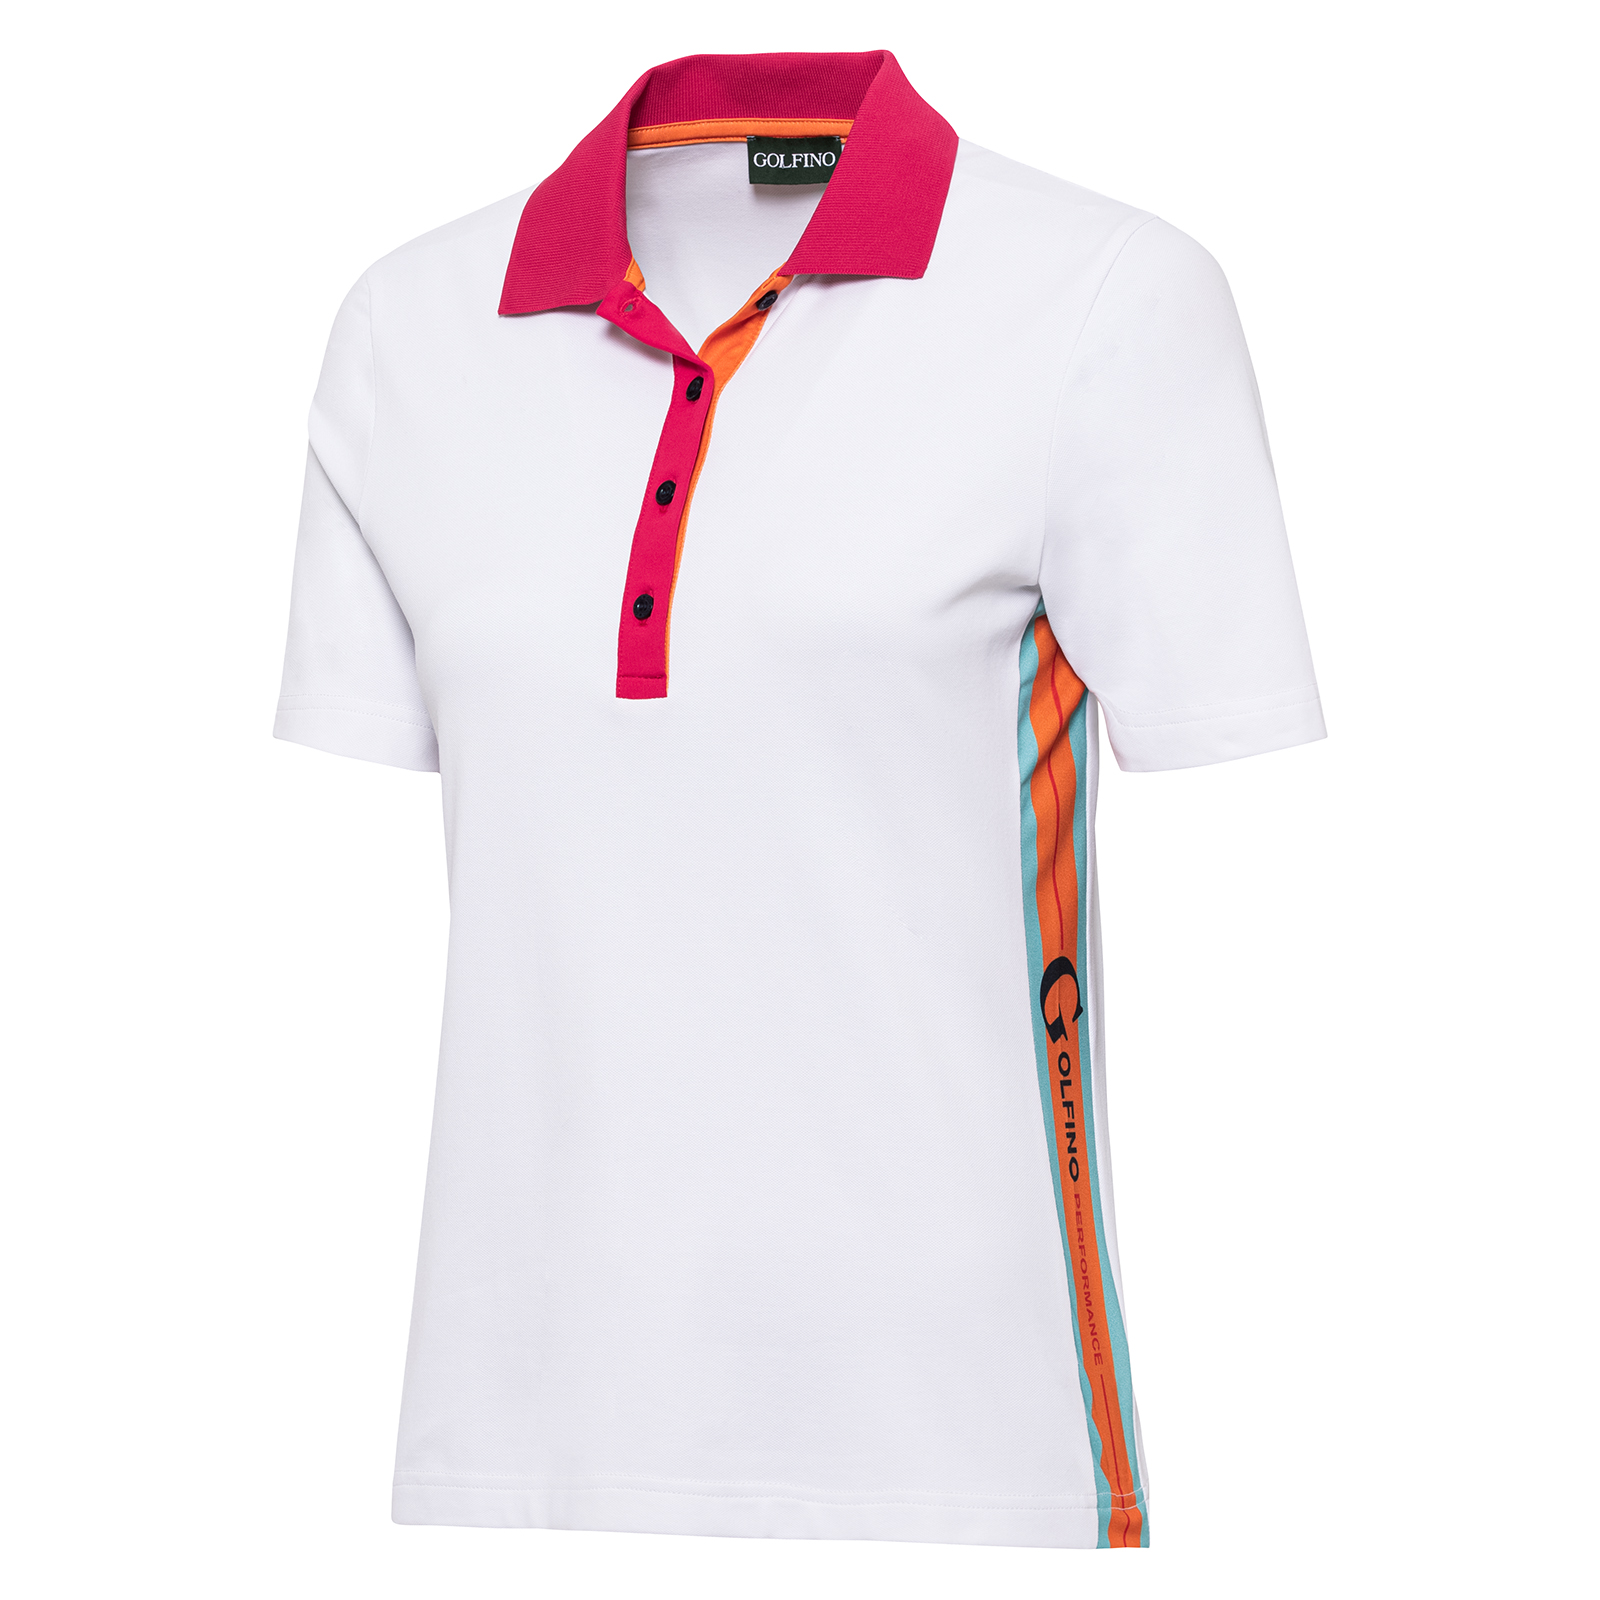 Ladies' golf polo shirt with ultraviolet protection